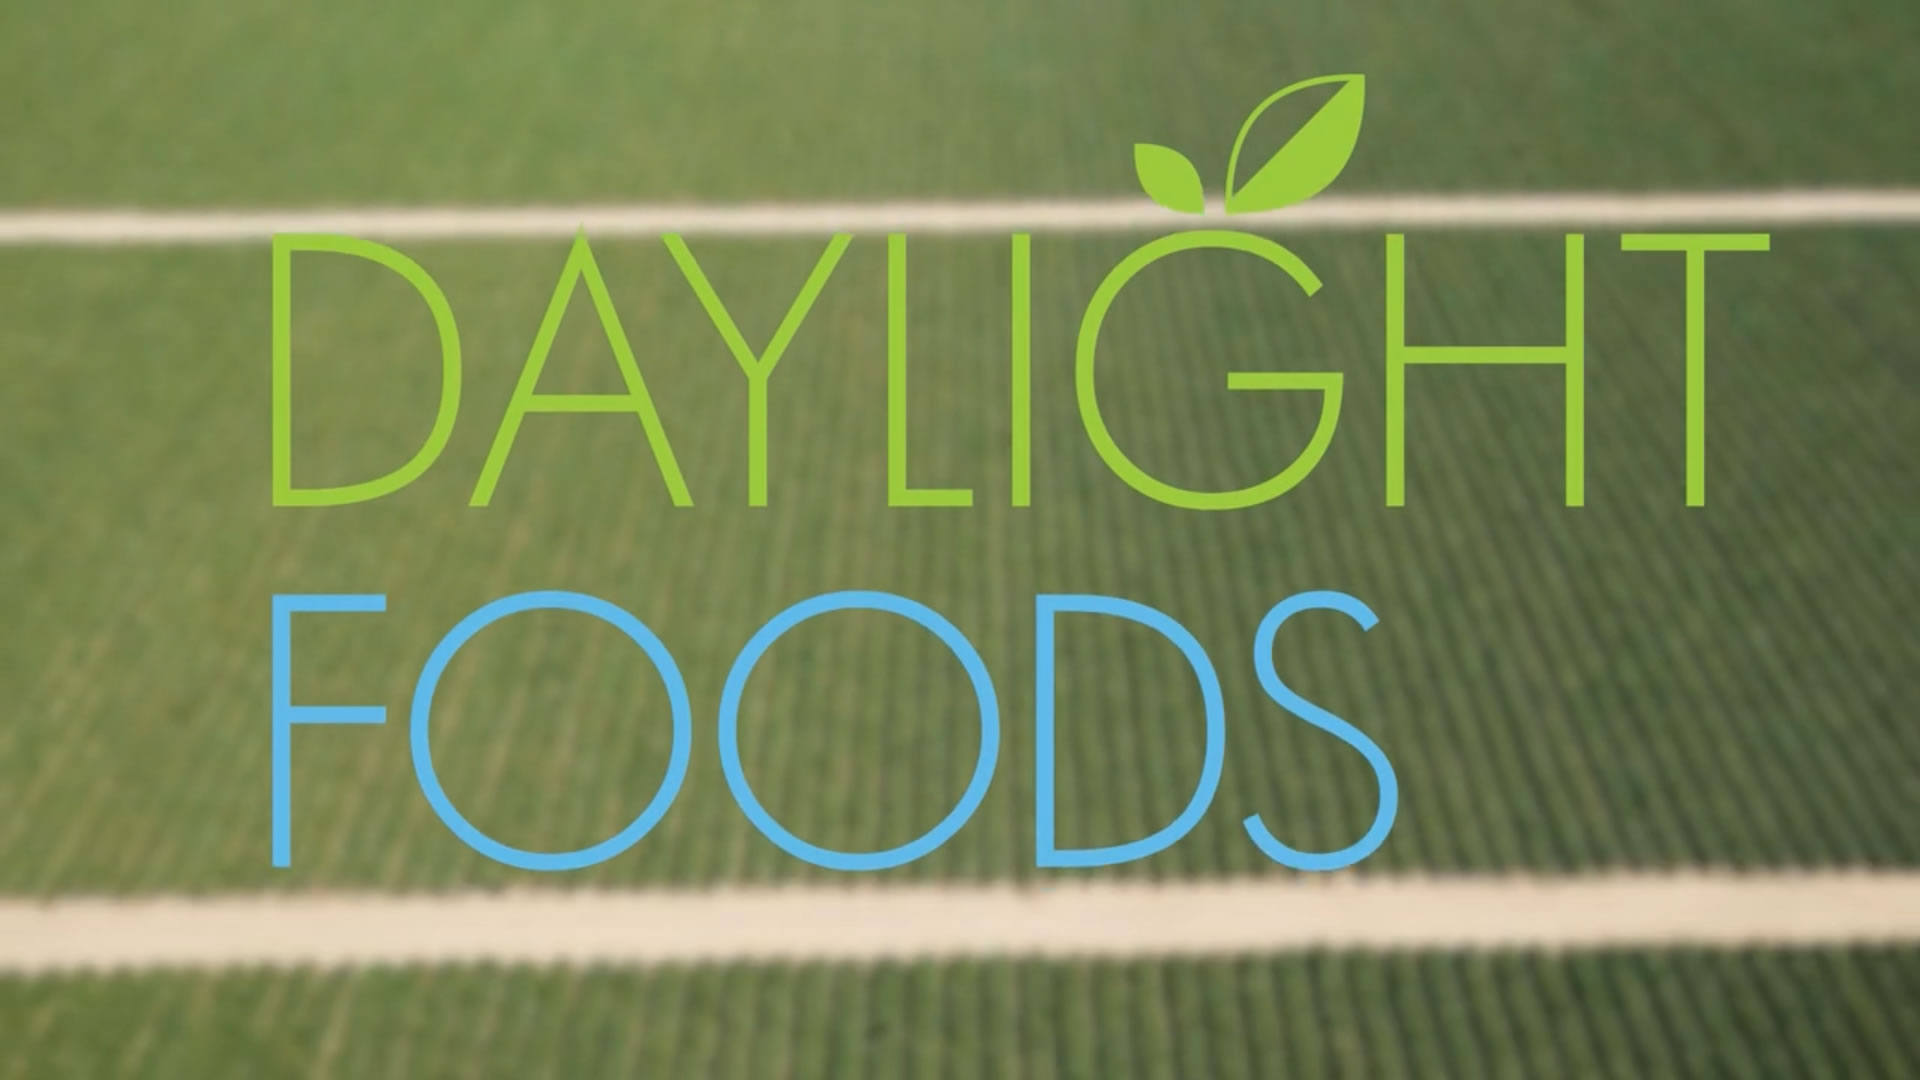 A Quick Look at Daylight Foods and Taylor Farms